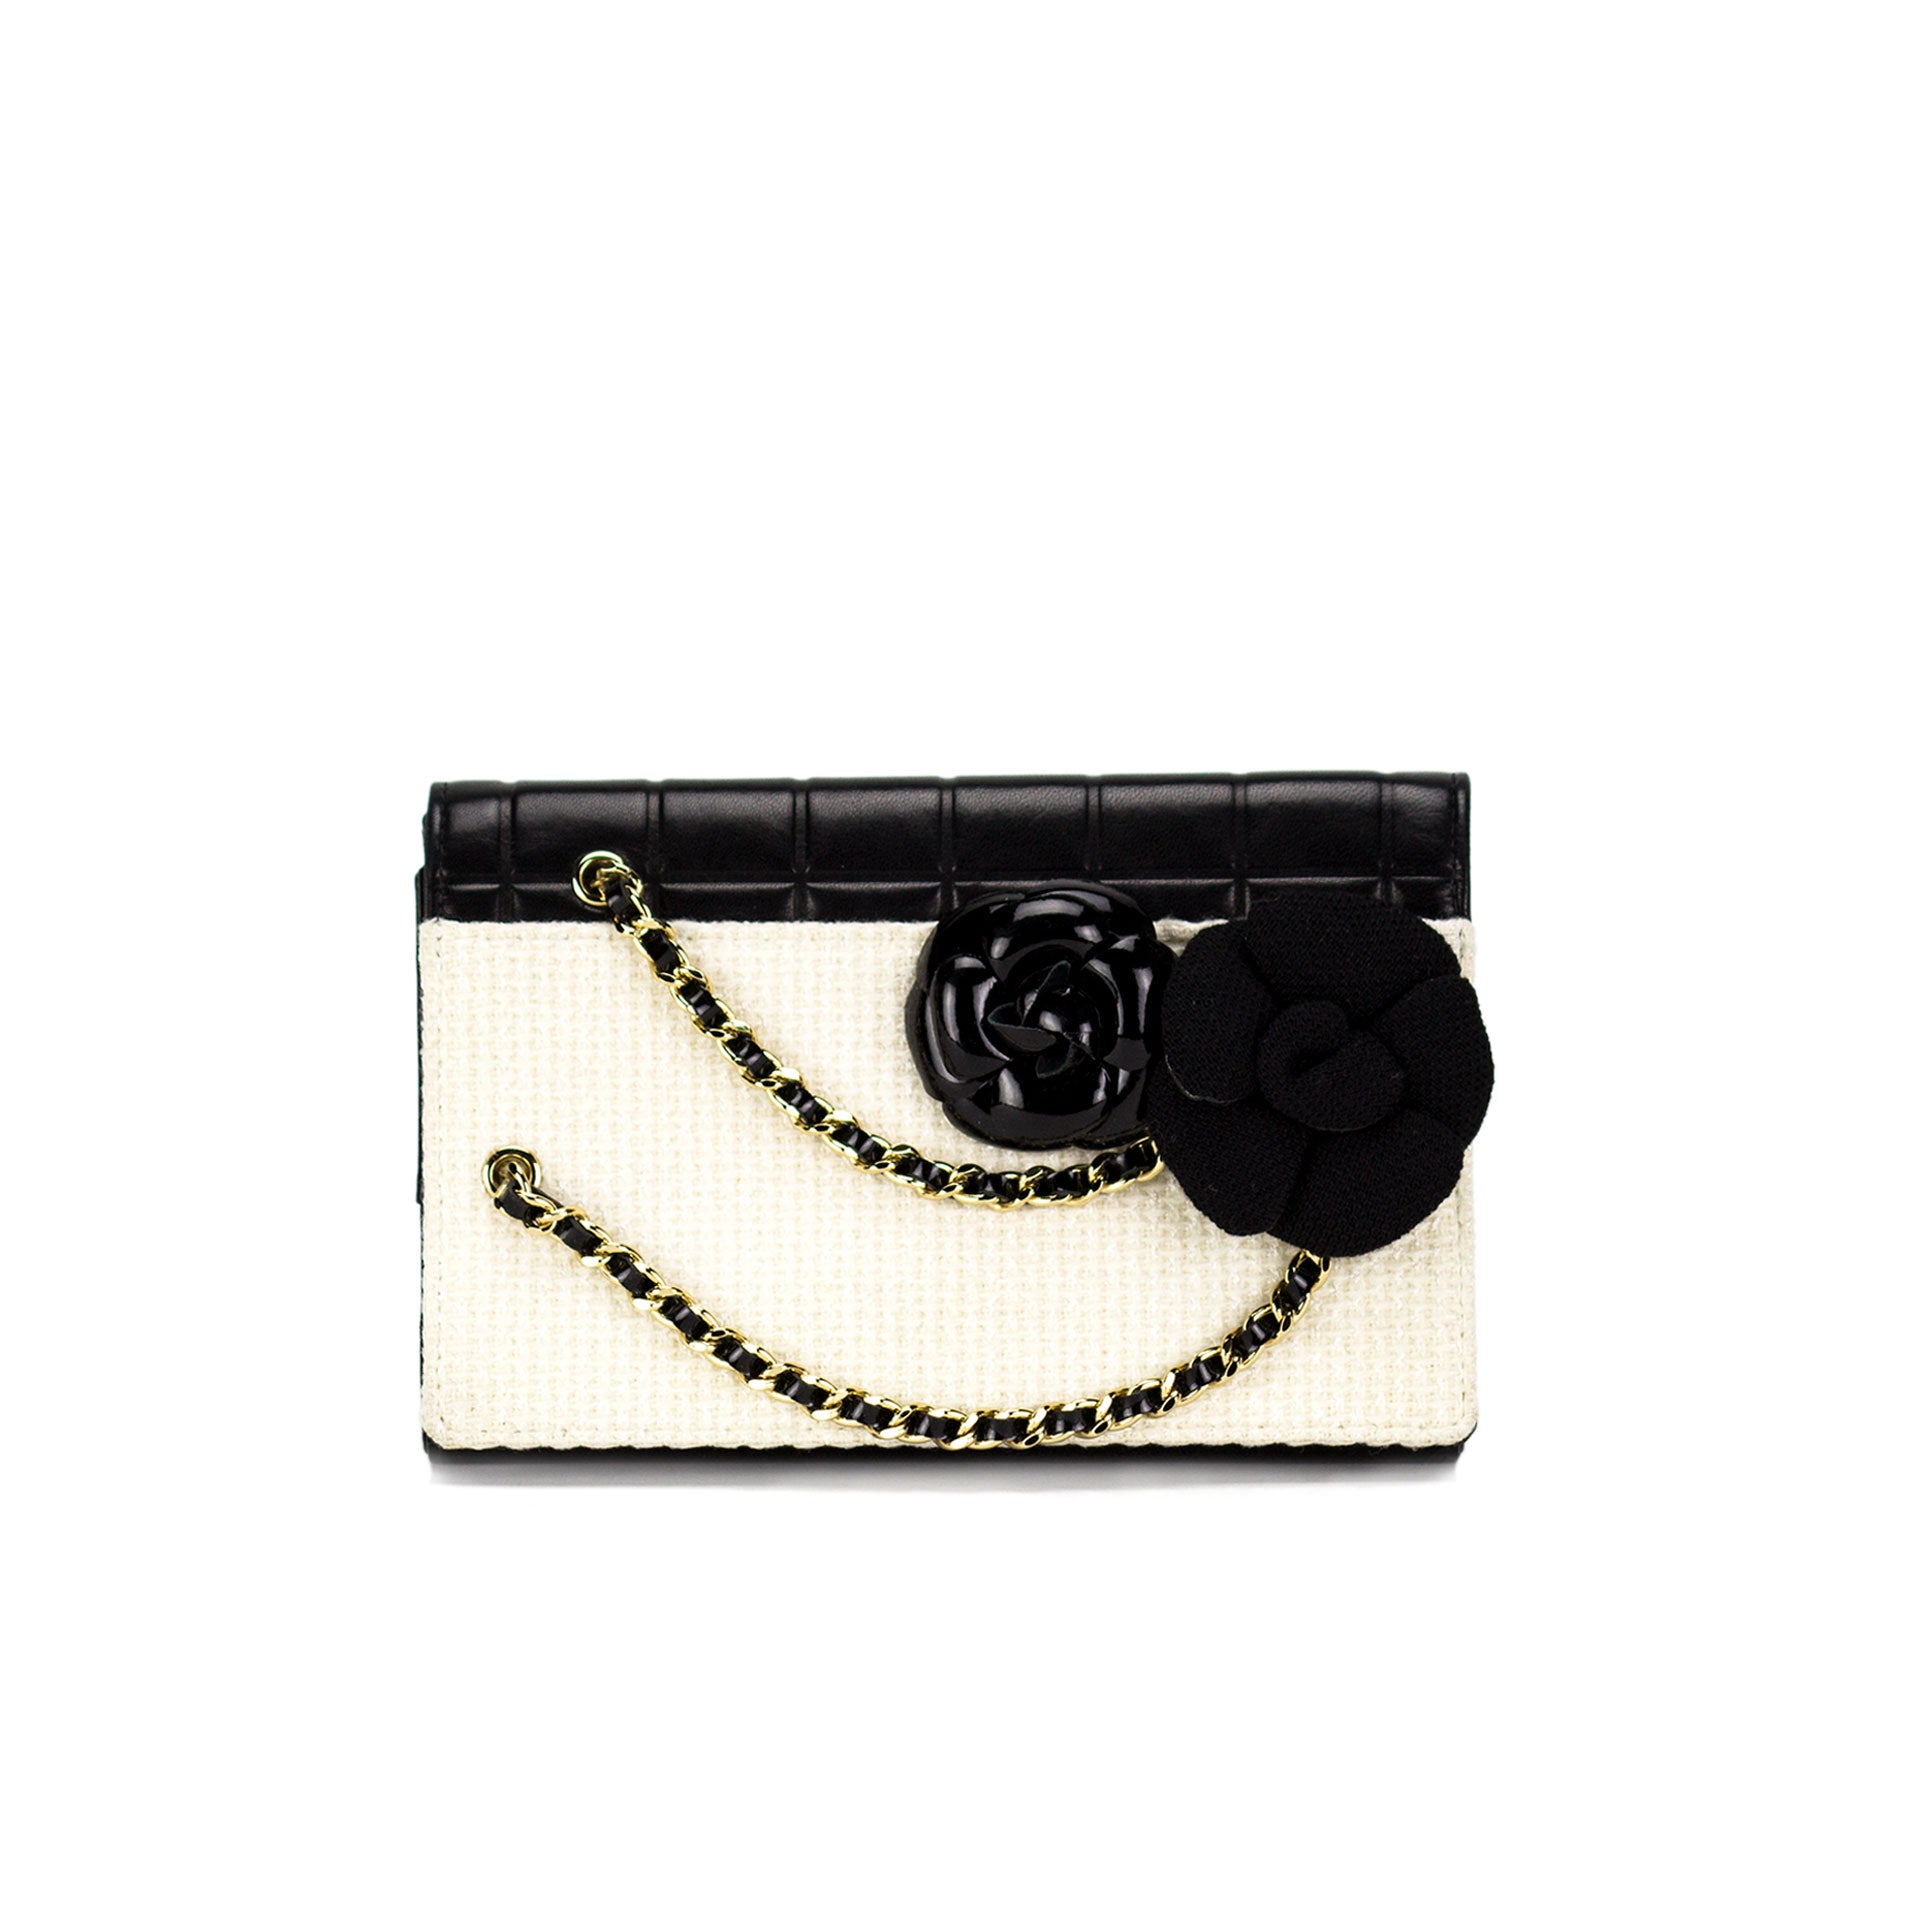 A RUNWAY BLACK & WHITE LUCITE BARCODE LEGO CLUTCH WITH SILVER HARDWARE